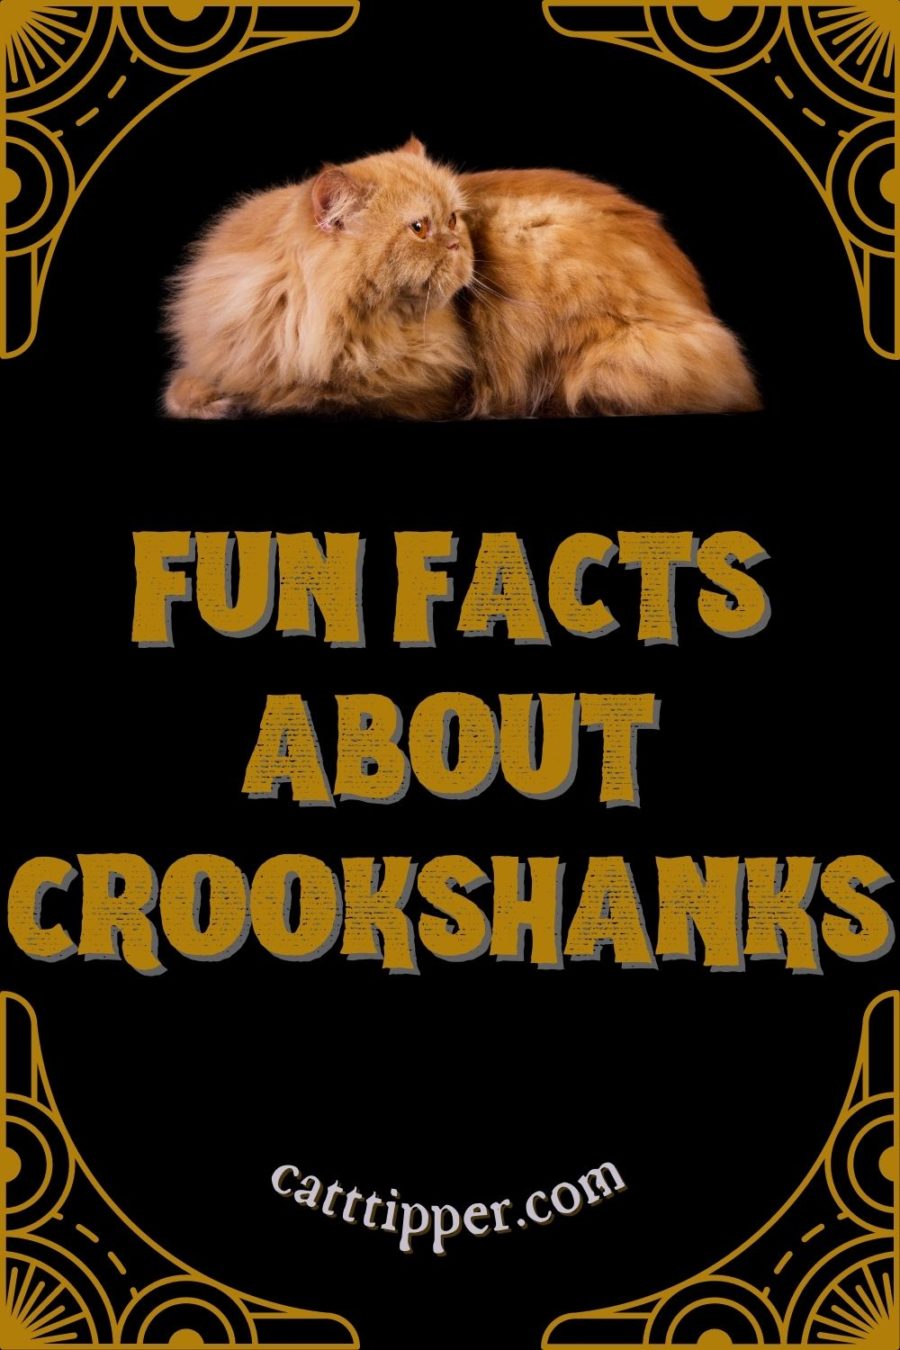 Crookshanks as a cat name--facts about this cat in the Harry Potter books and films